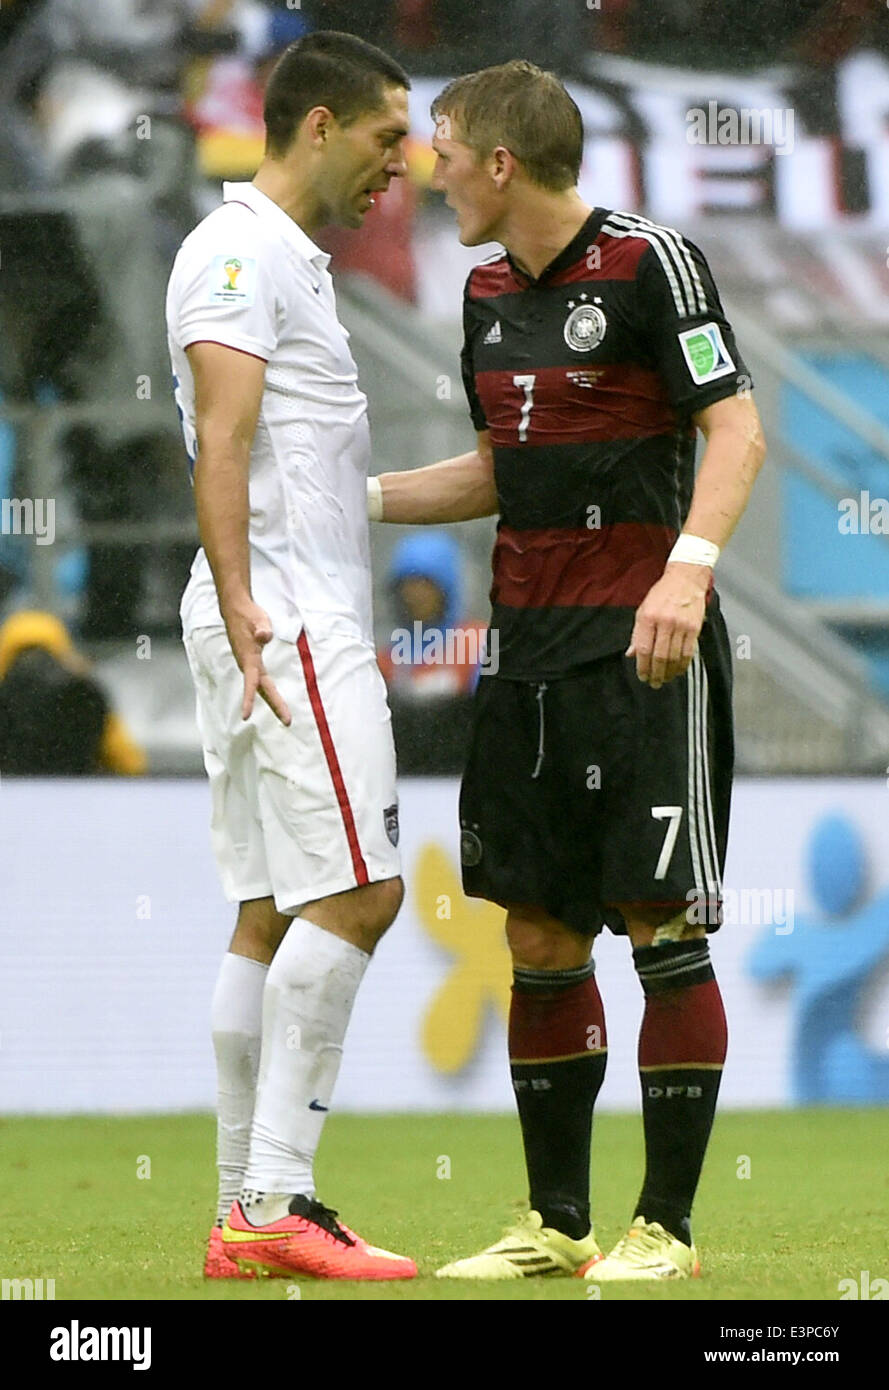 Recife, Brazil. 26th June, 2014. Clint Dempsey of the U.S. (L) argues with Germany's Bastian Schweinsteiger during a Group G match between the U.S. and Germany of 2014 FIFA World Cup at the Arena Pernambuco Stadium in Recife, Brazil, on June 26, 2014. Credit:  Lui Siu Wai/Xinhua/Alamy Live News Stock Photo